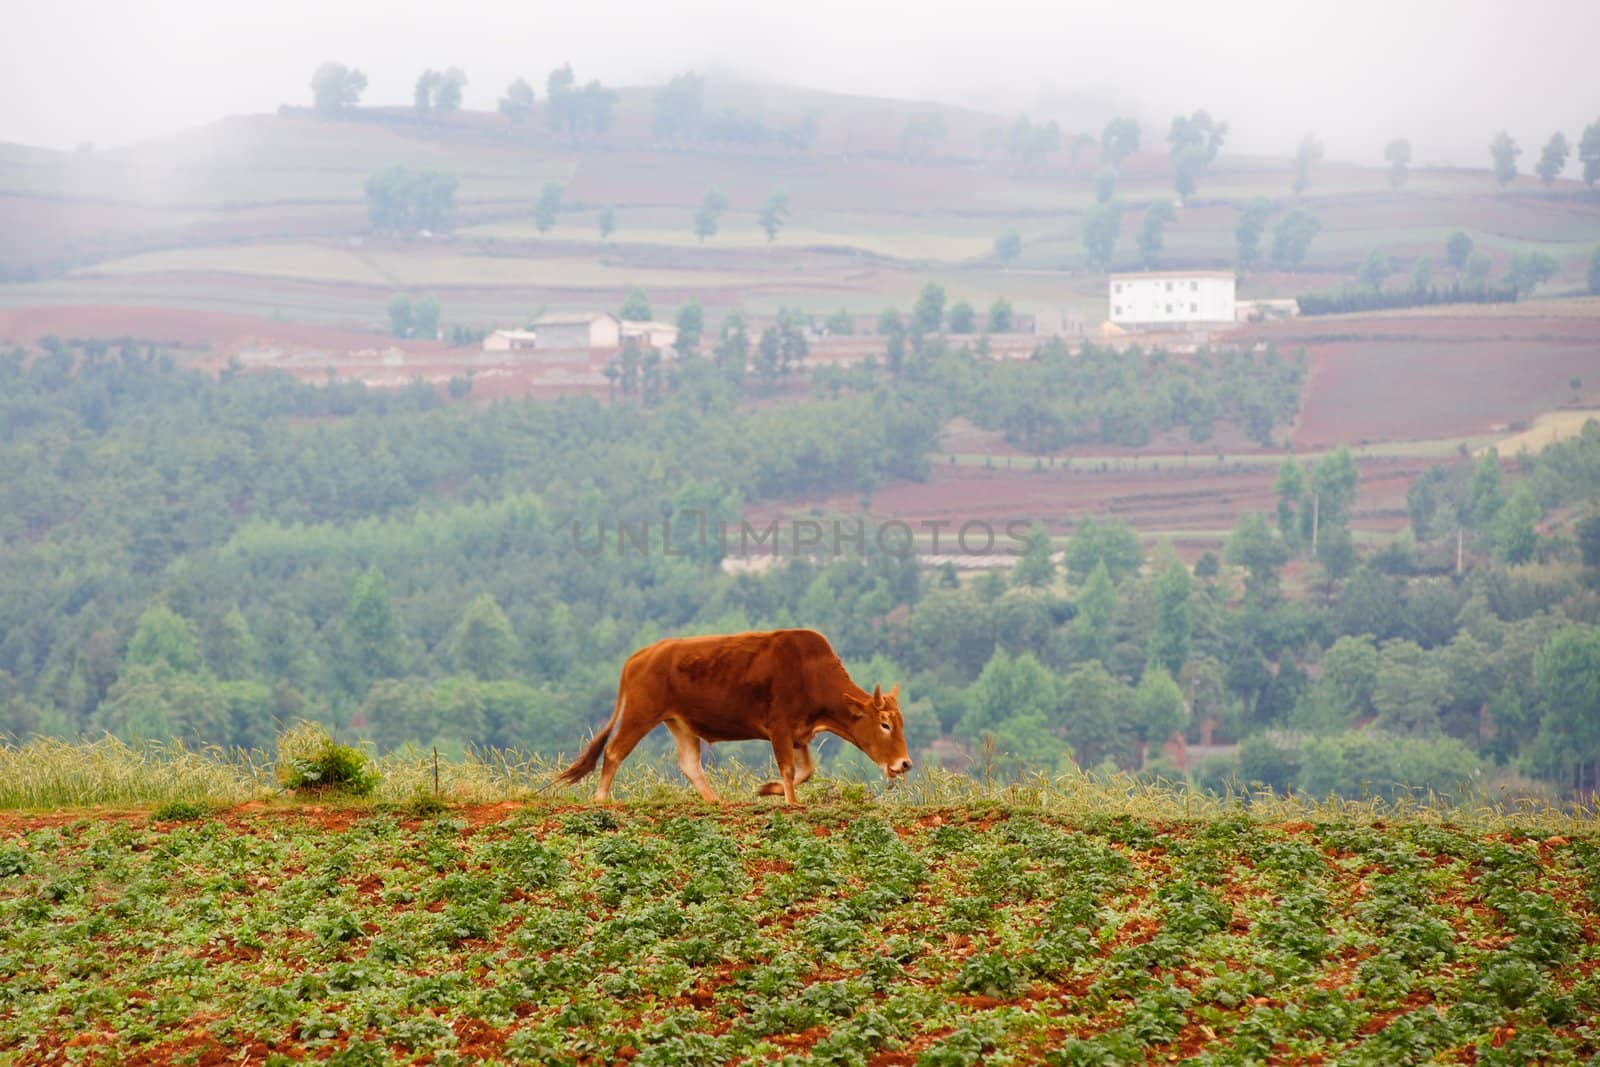 Cattle walking in the wheat field in Dongchuan district, Kunming city, Yunnan province of China